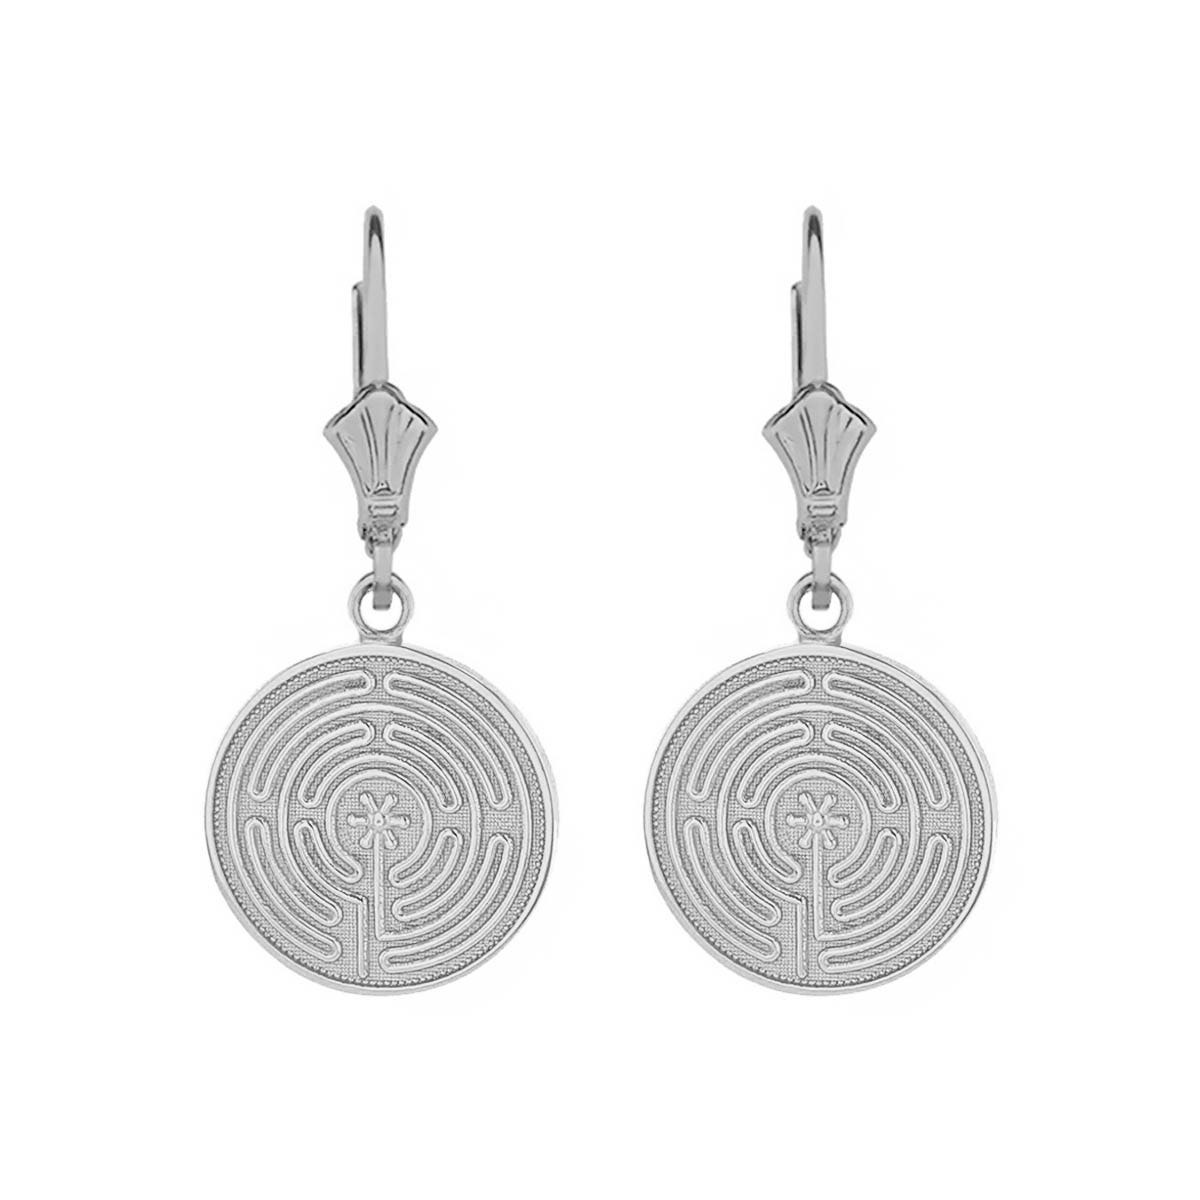 Gold Boutique - Gents Earrings in Silver GOOFASH